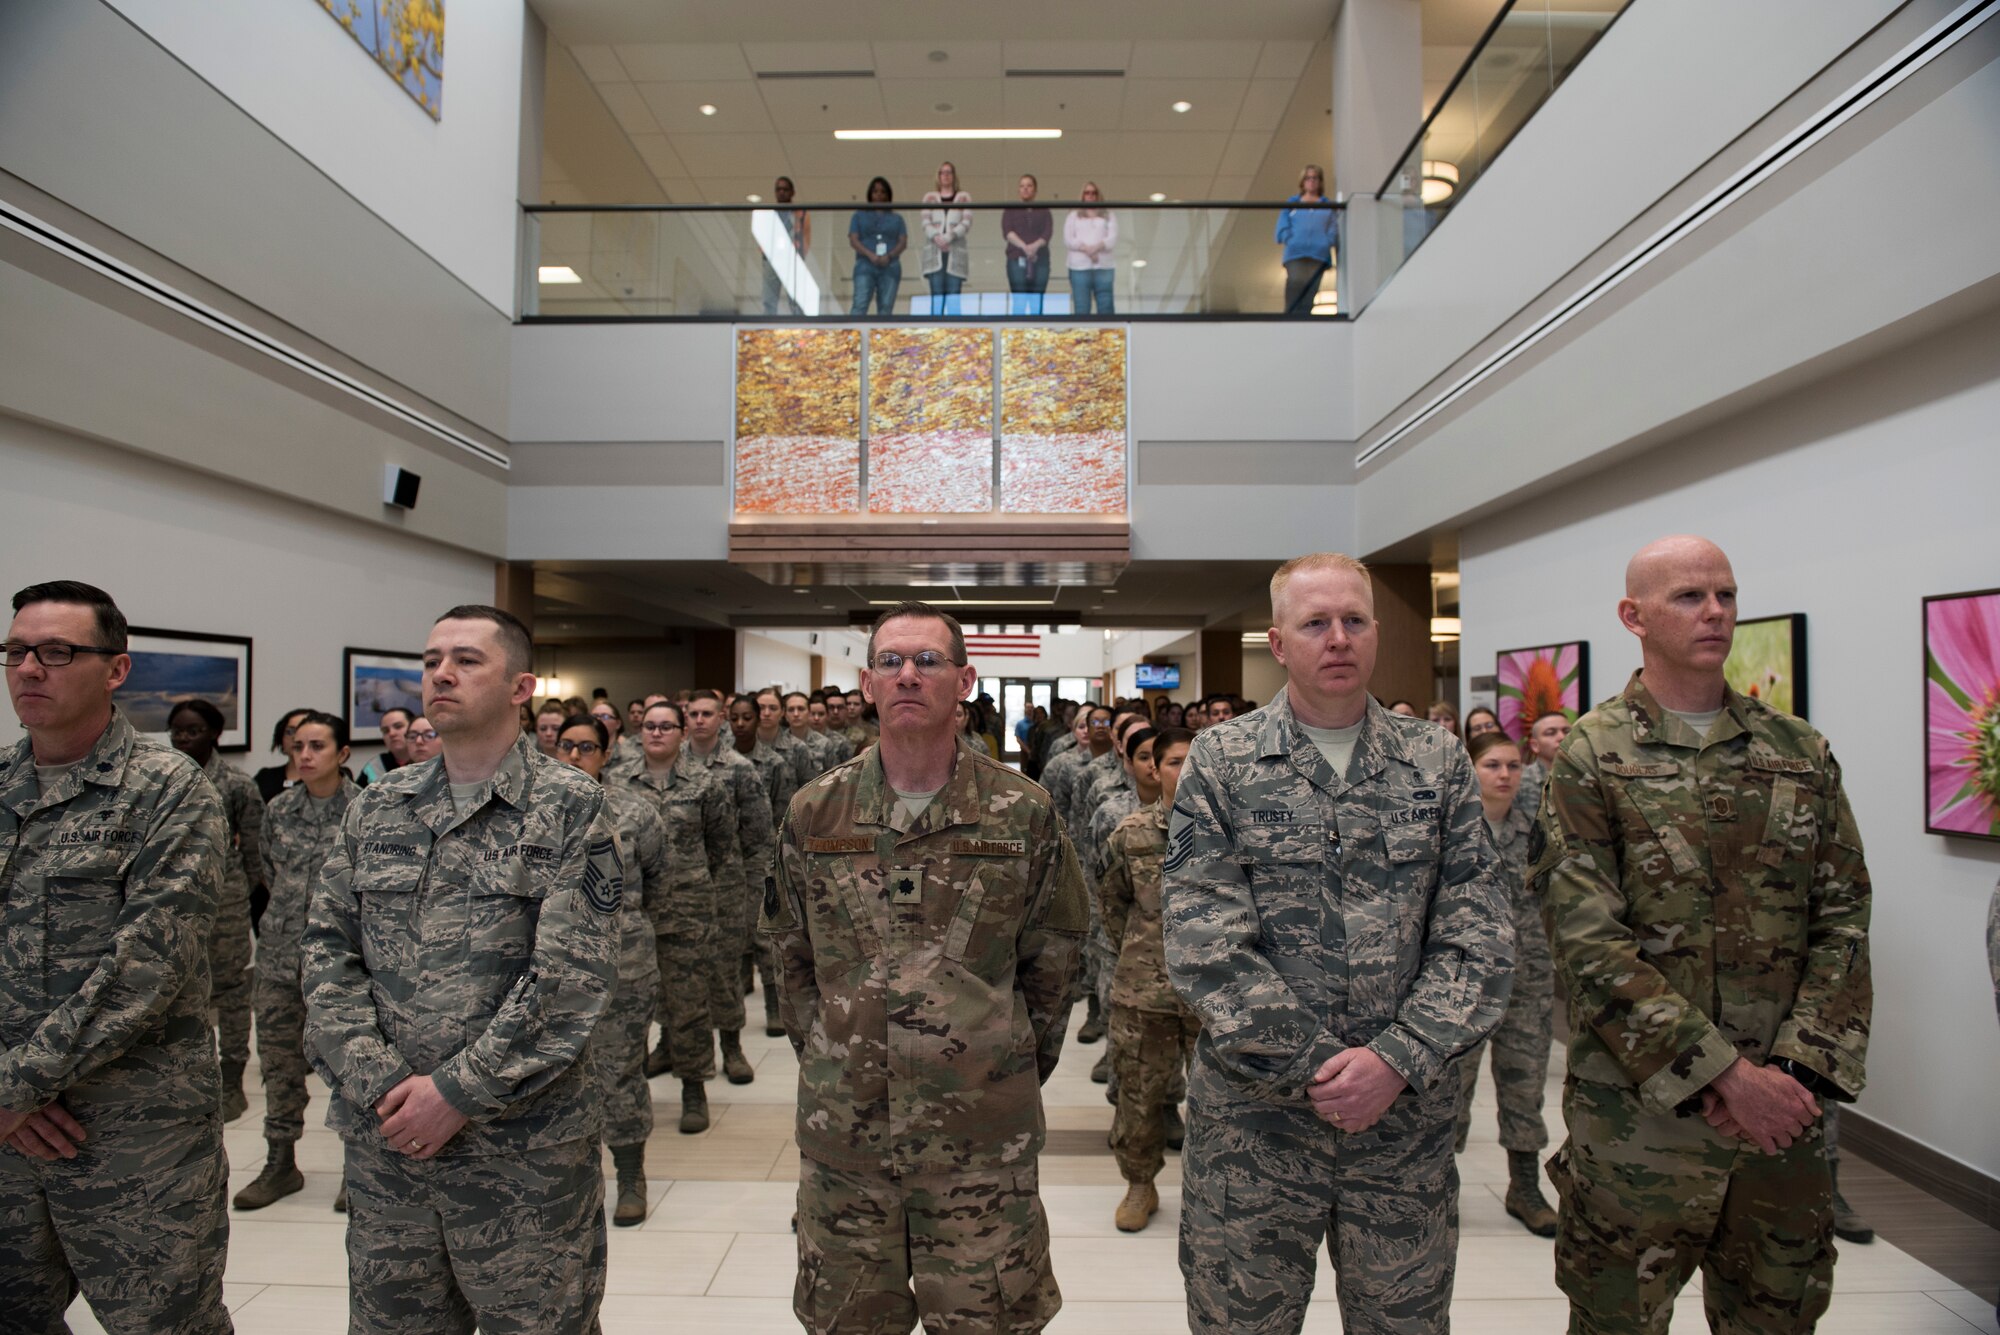 Members from the 27th Special Operations Medical Group stand in formation during the 27th SOMDG building ribbon cutting ceremony at Cannon AFB, N.M., Feb. 23, 2018. This upgrade has been planned for the last few years. The ground-breaking ceremony was July of 2015 and now, nearly three years later, the building complete and open for patients. (U.S. Air Force photo by Staff Sgt. Michael Washburn/Released)